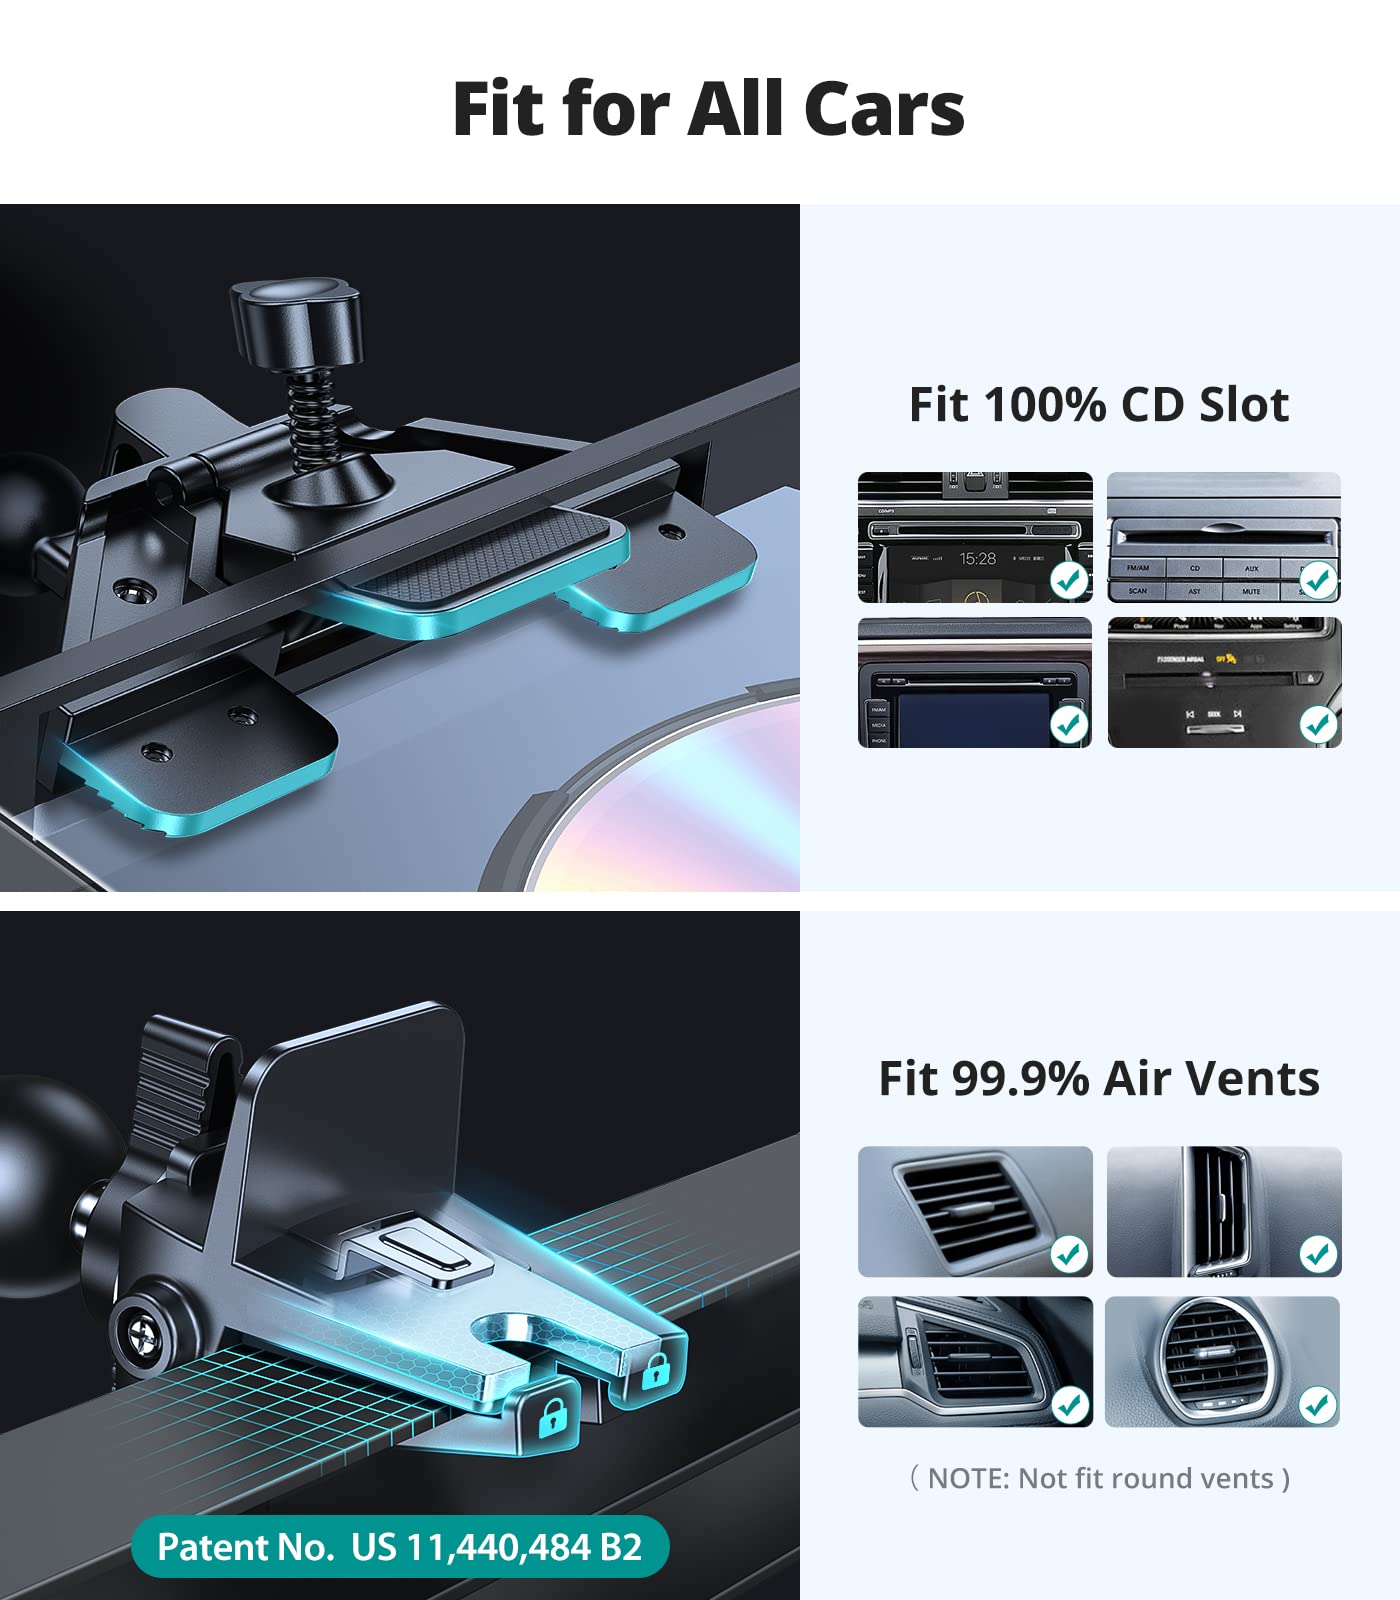 VICSEED ????????????????????????????????-???????????????????? ???????????????????????? Phone Mount for Car, ???????????????????????????????? ???????????????? ???????????????????? CD Slot & Air Vent Thick Case Friendly Car Phone Holder Mount Fit for iPhone